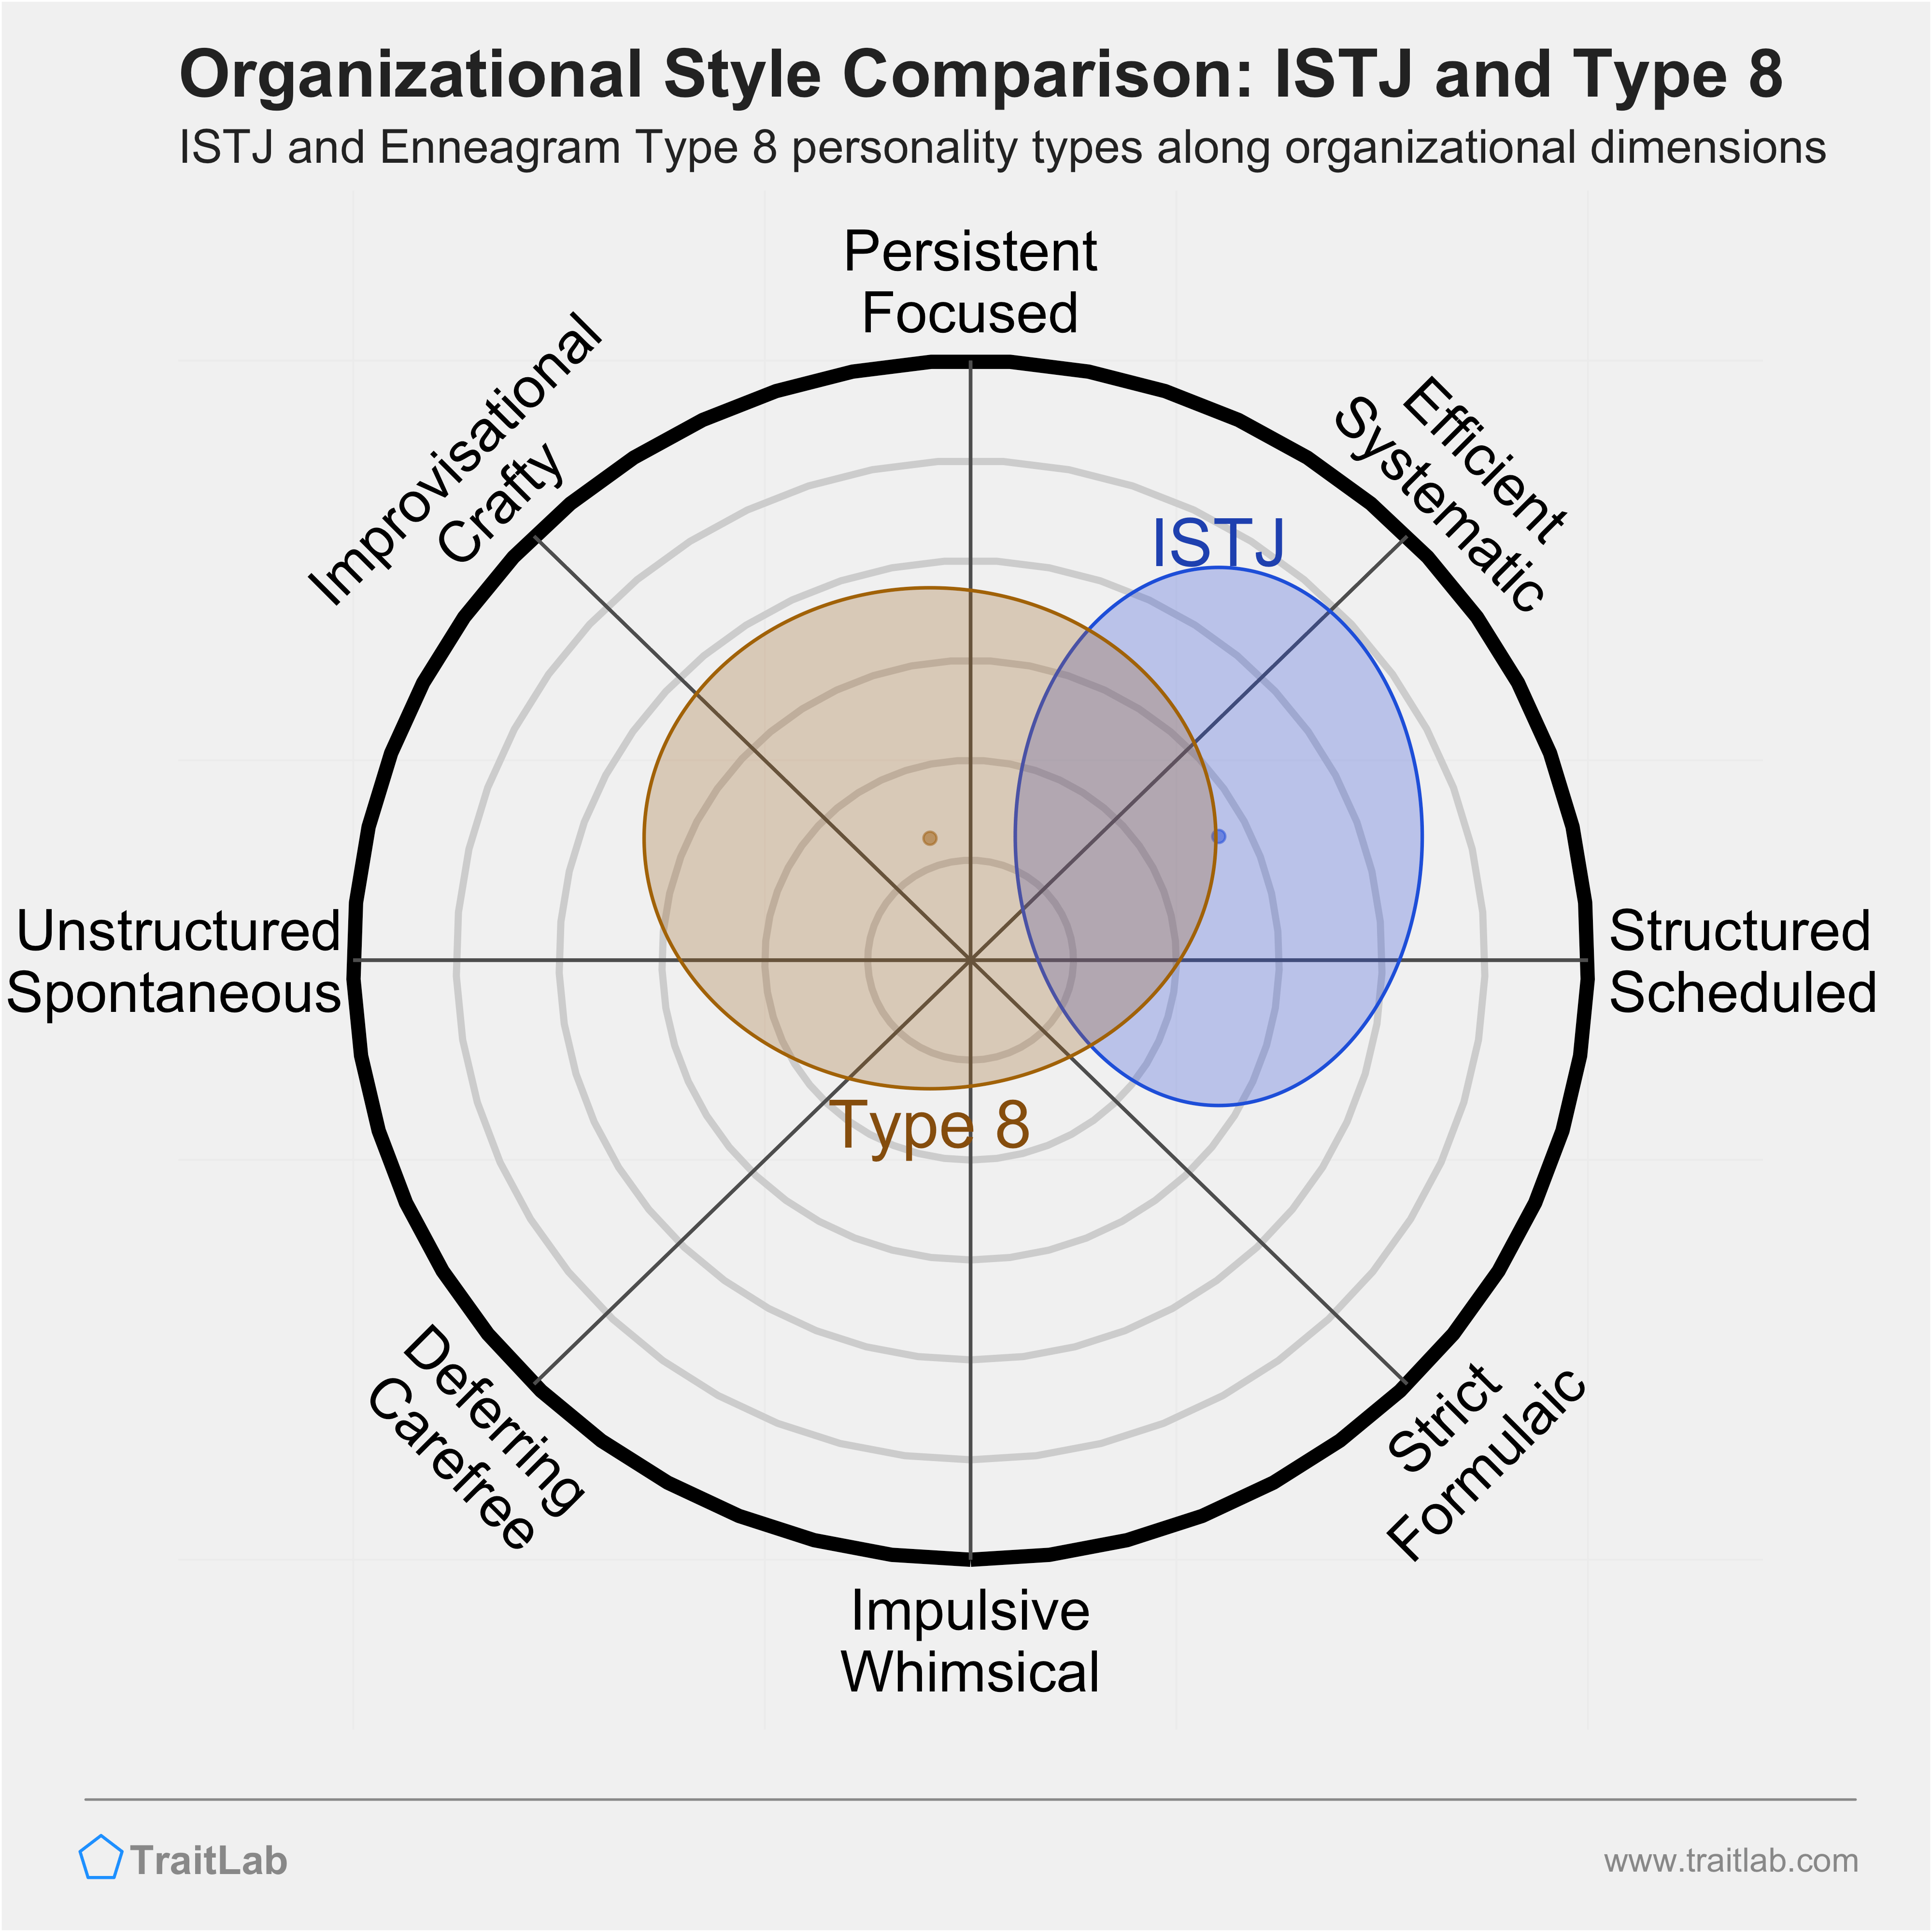 ISTJ and Type 8 comparison across organizational dimensions